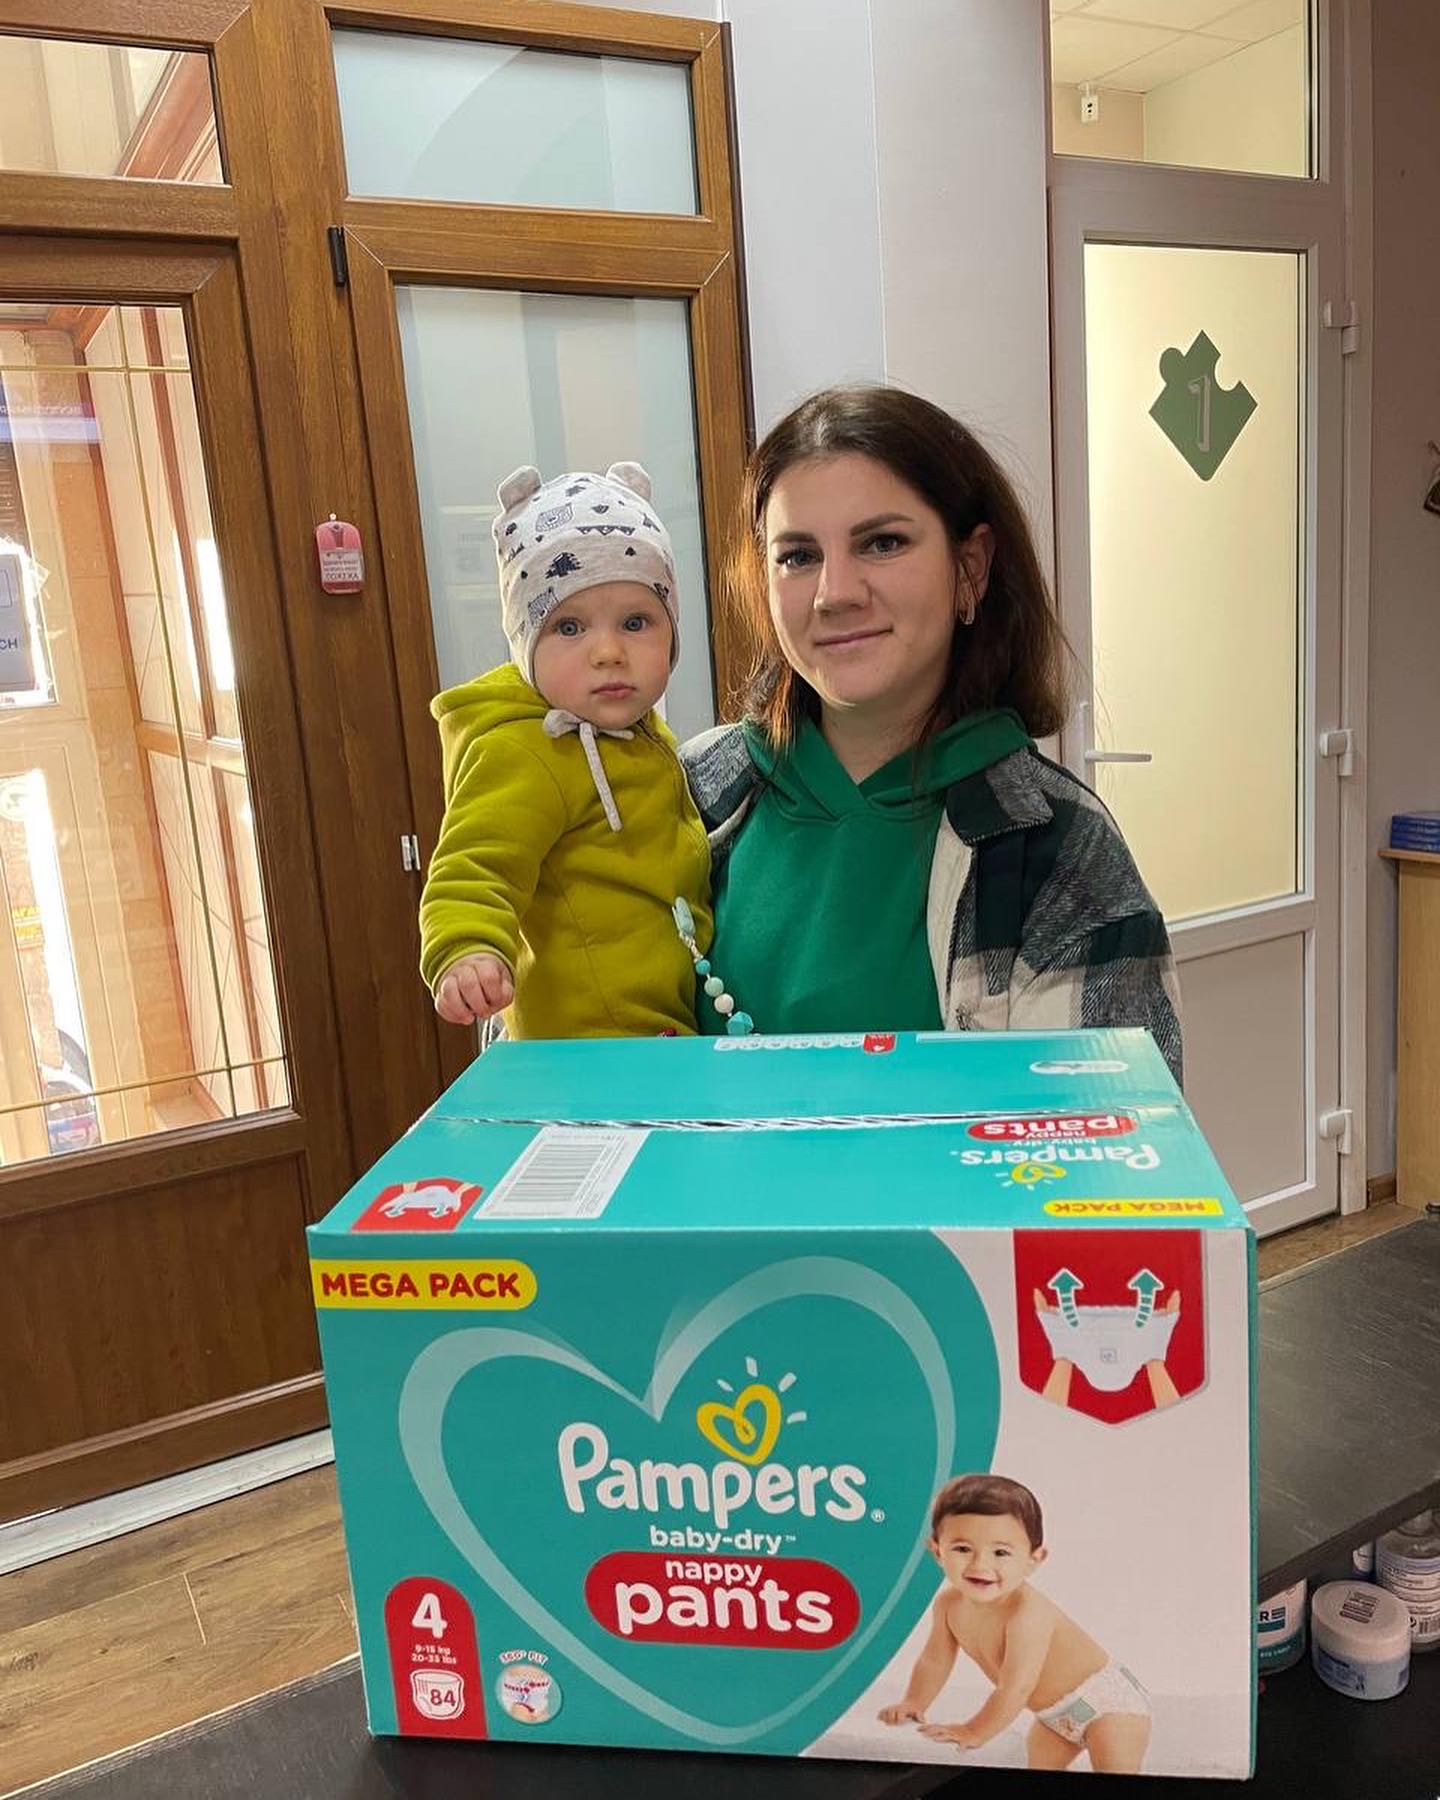 A woman holding a baby in front of a box of pampers diapers.